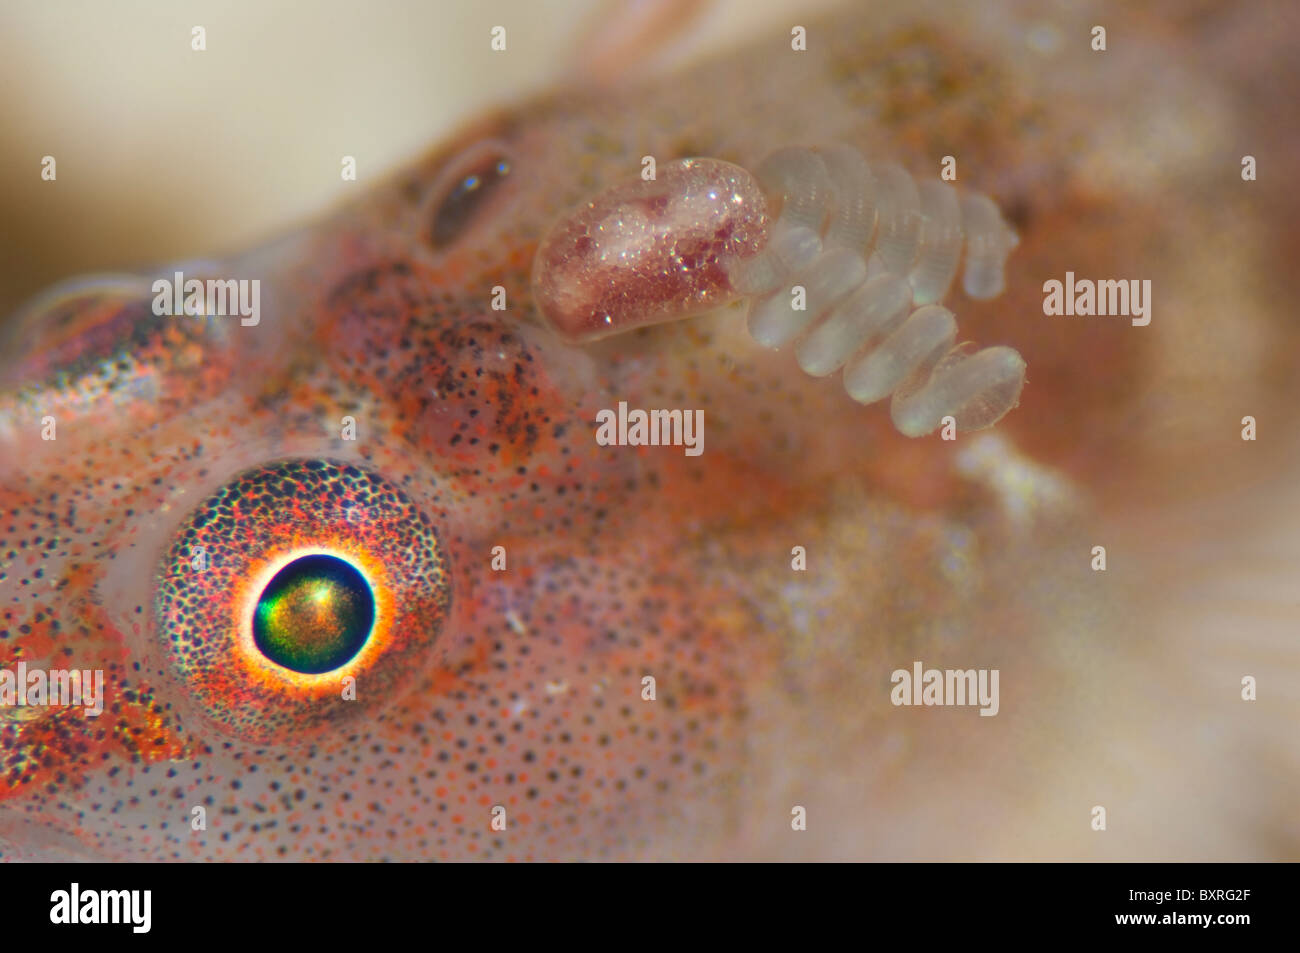 Wolfsnout Goby, Luposicya lupus, with Copepod attached, spiralling egg ducts of Copepod visible, Lankayan, Sabah, Malaysia. Stock Photo